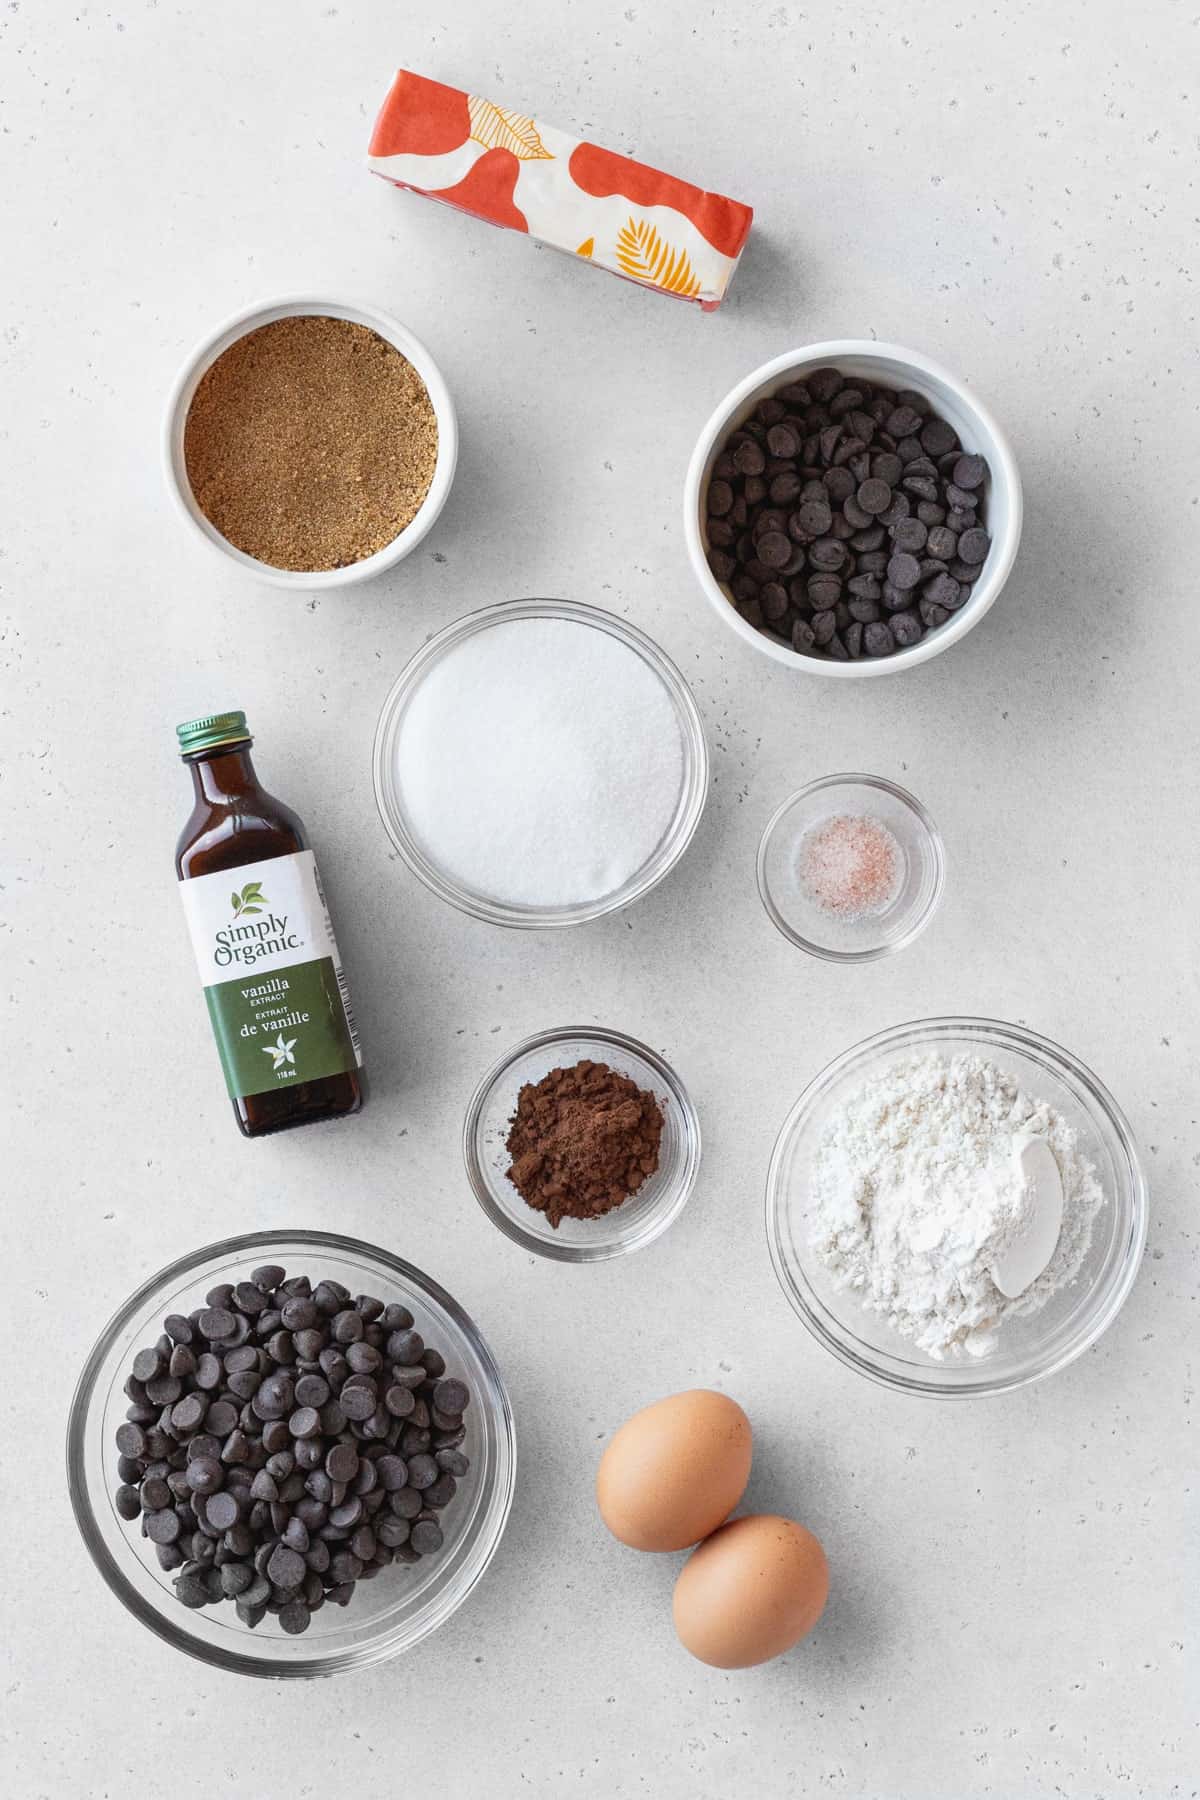 Ingredients for making fudgy gluten-free brownies measured out into bowls.